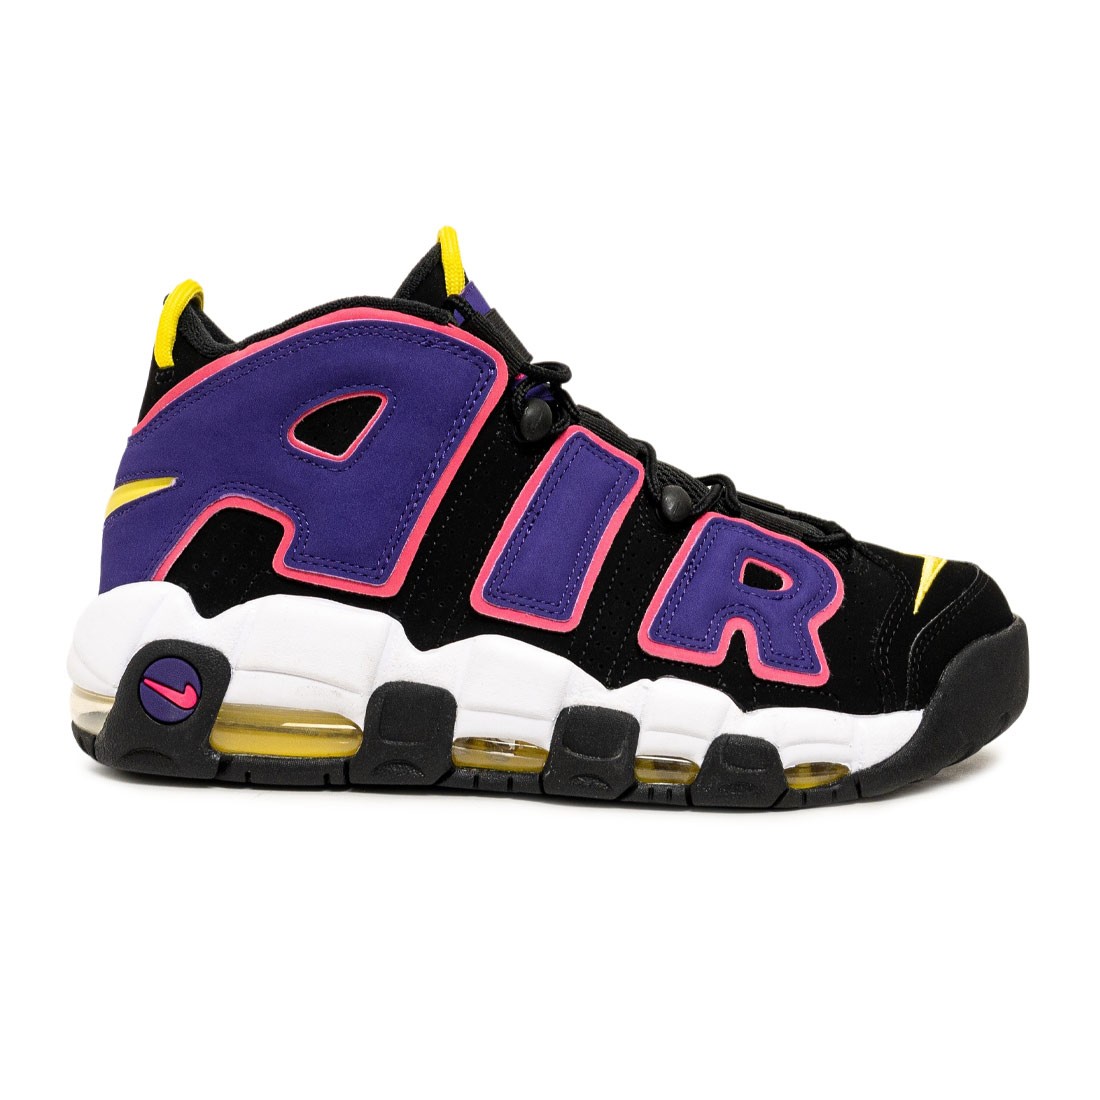 What are your views on the design of the Nike Air More Uptempo